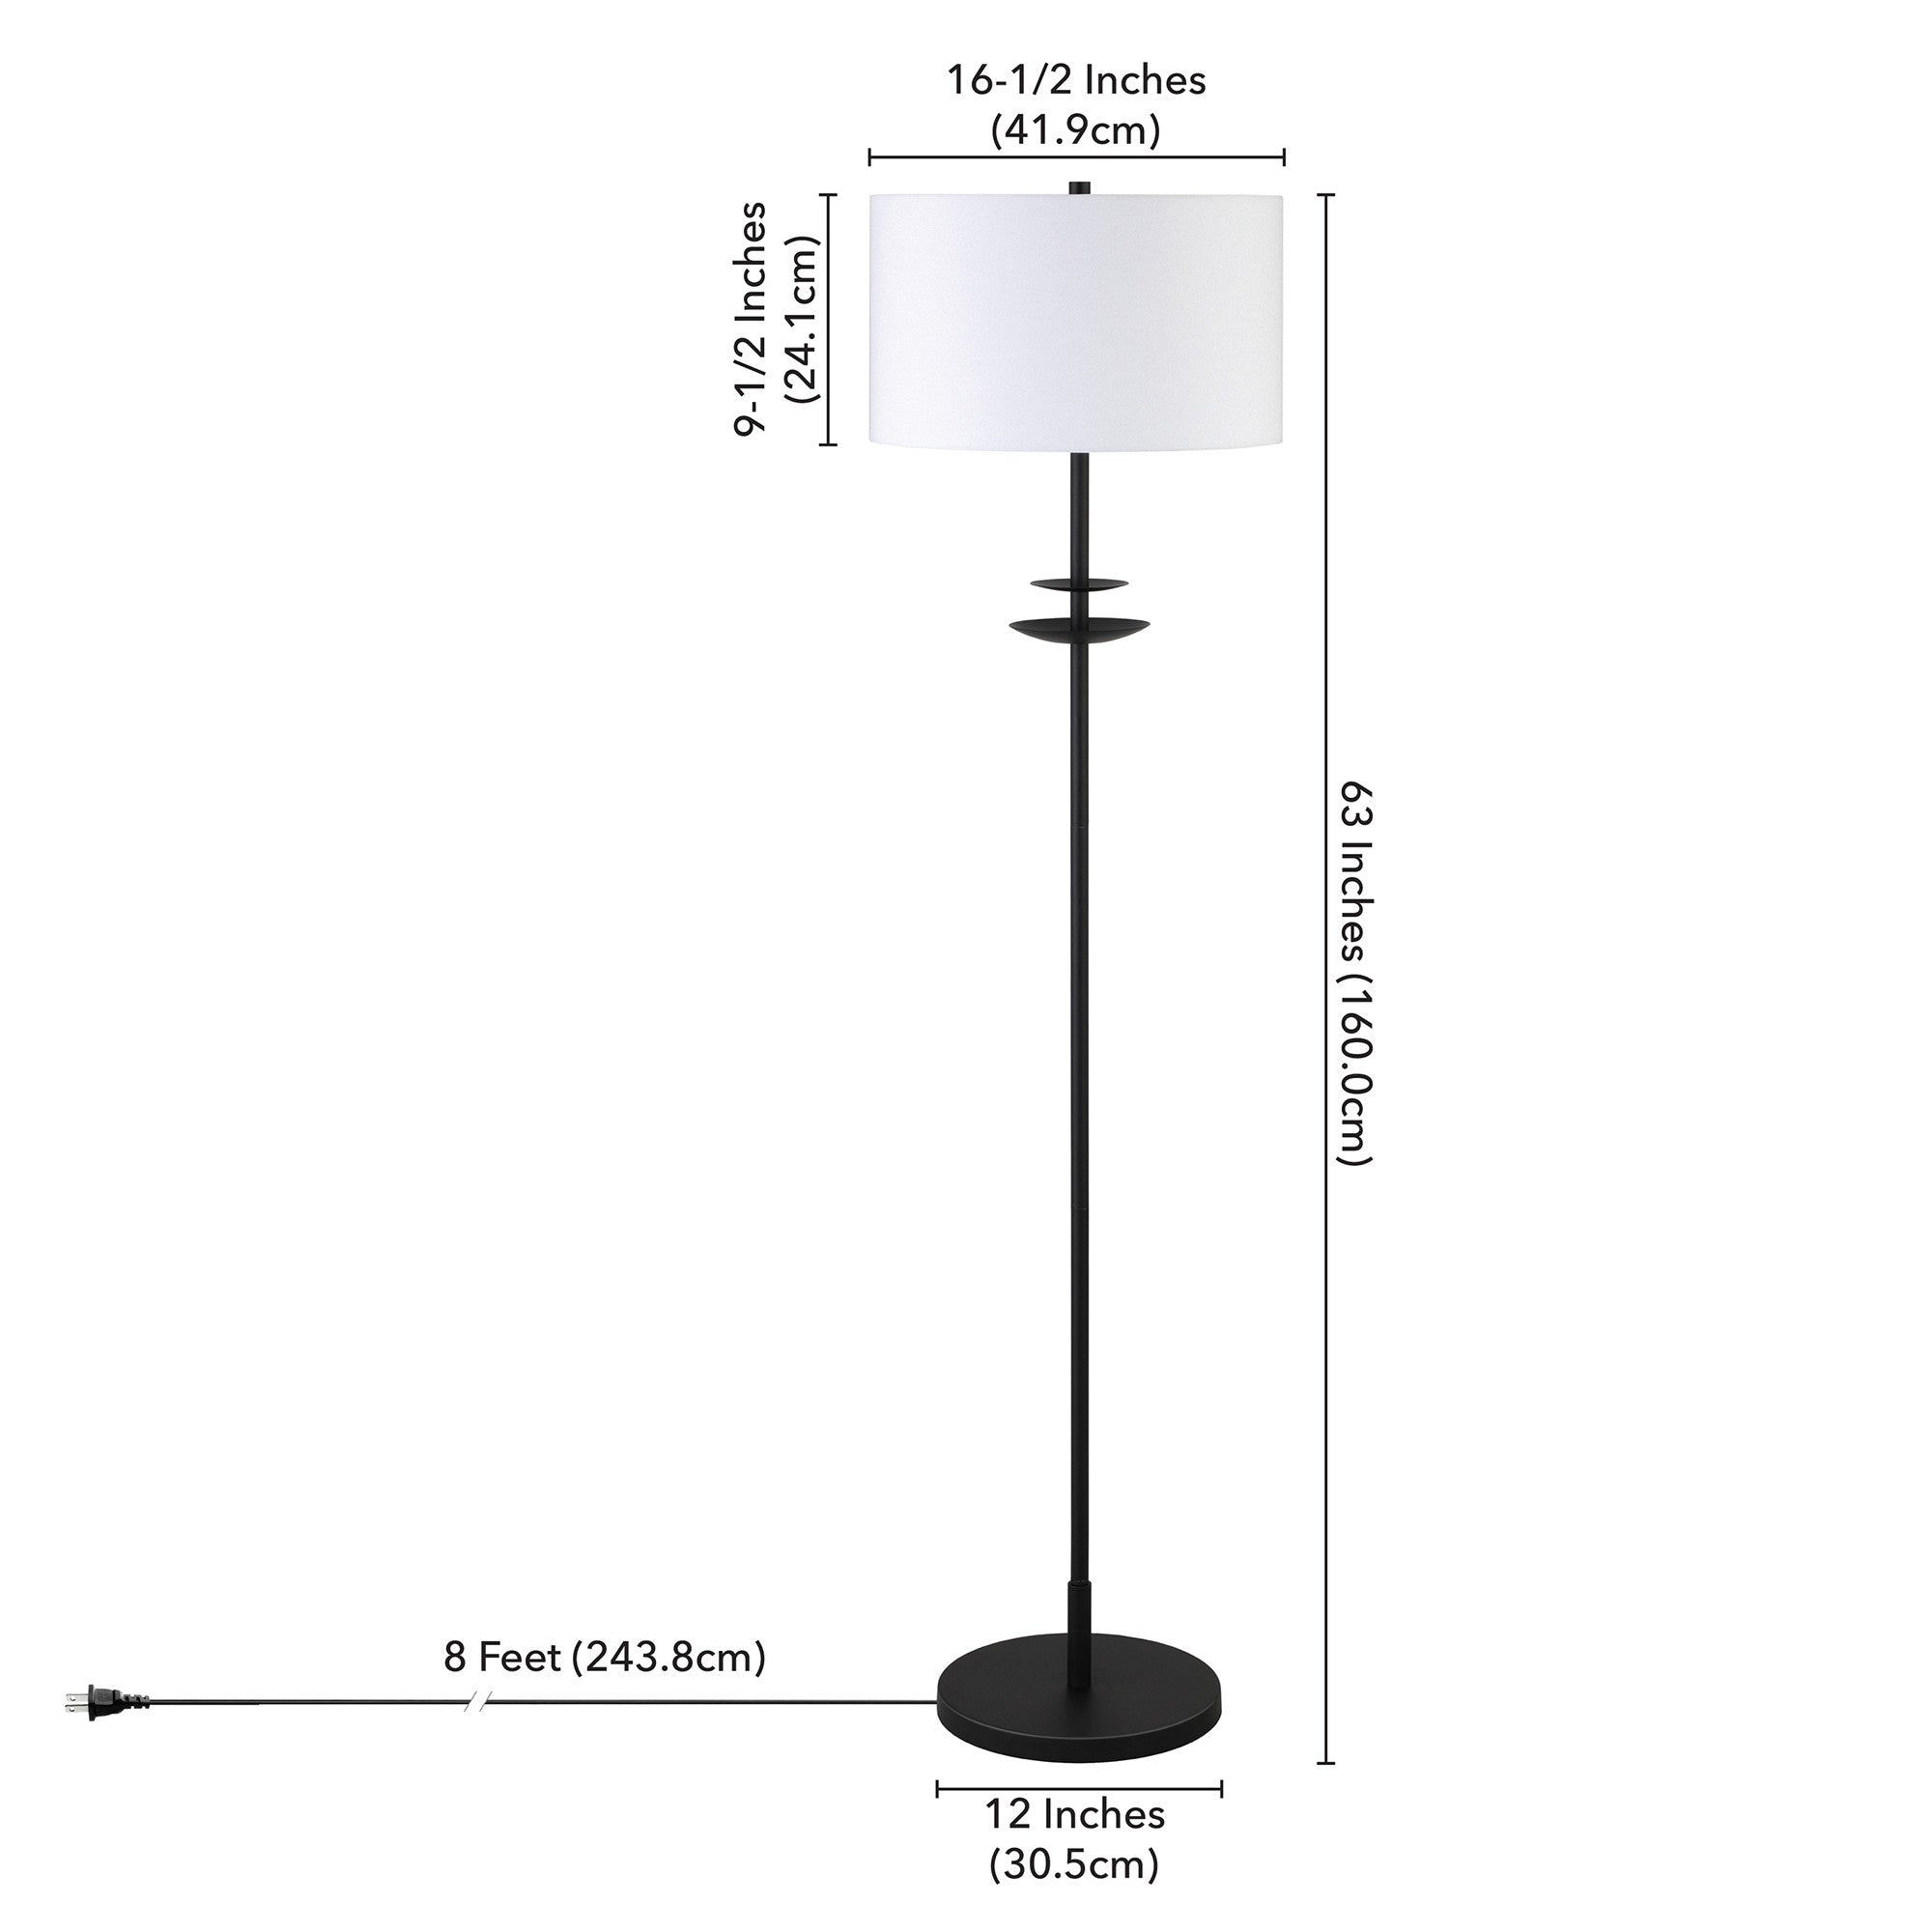 63" Black Traditional Shaped Floor Lamp With White Frosted Glass Drum Shade